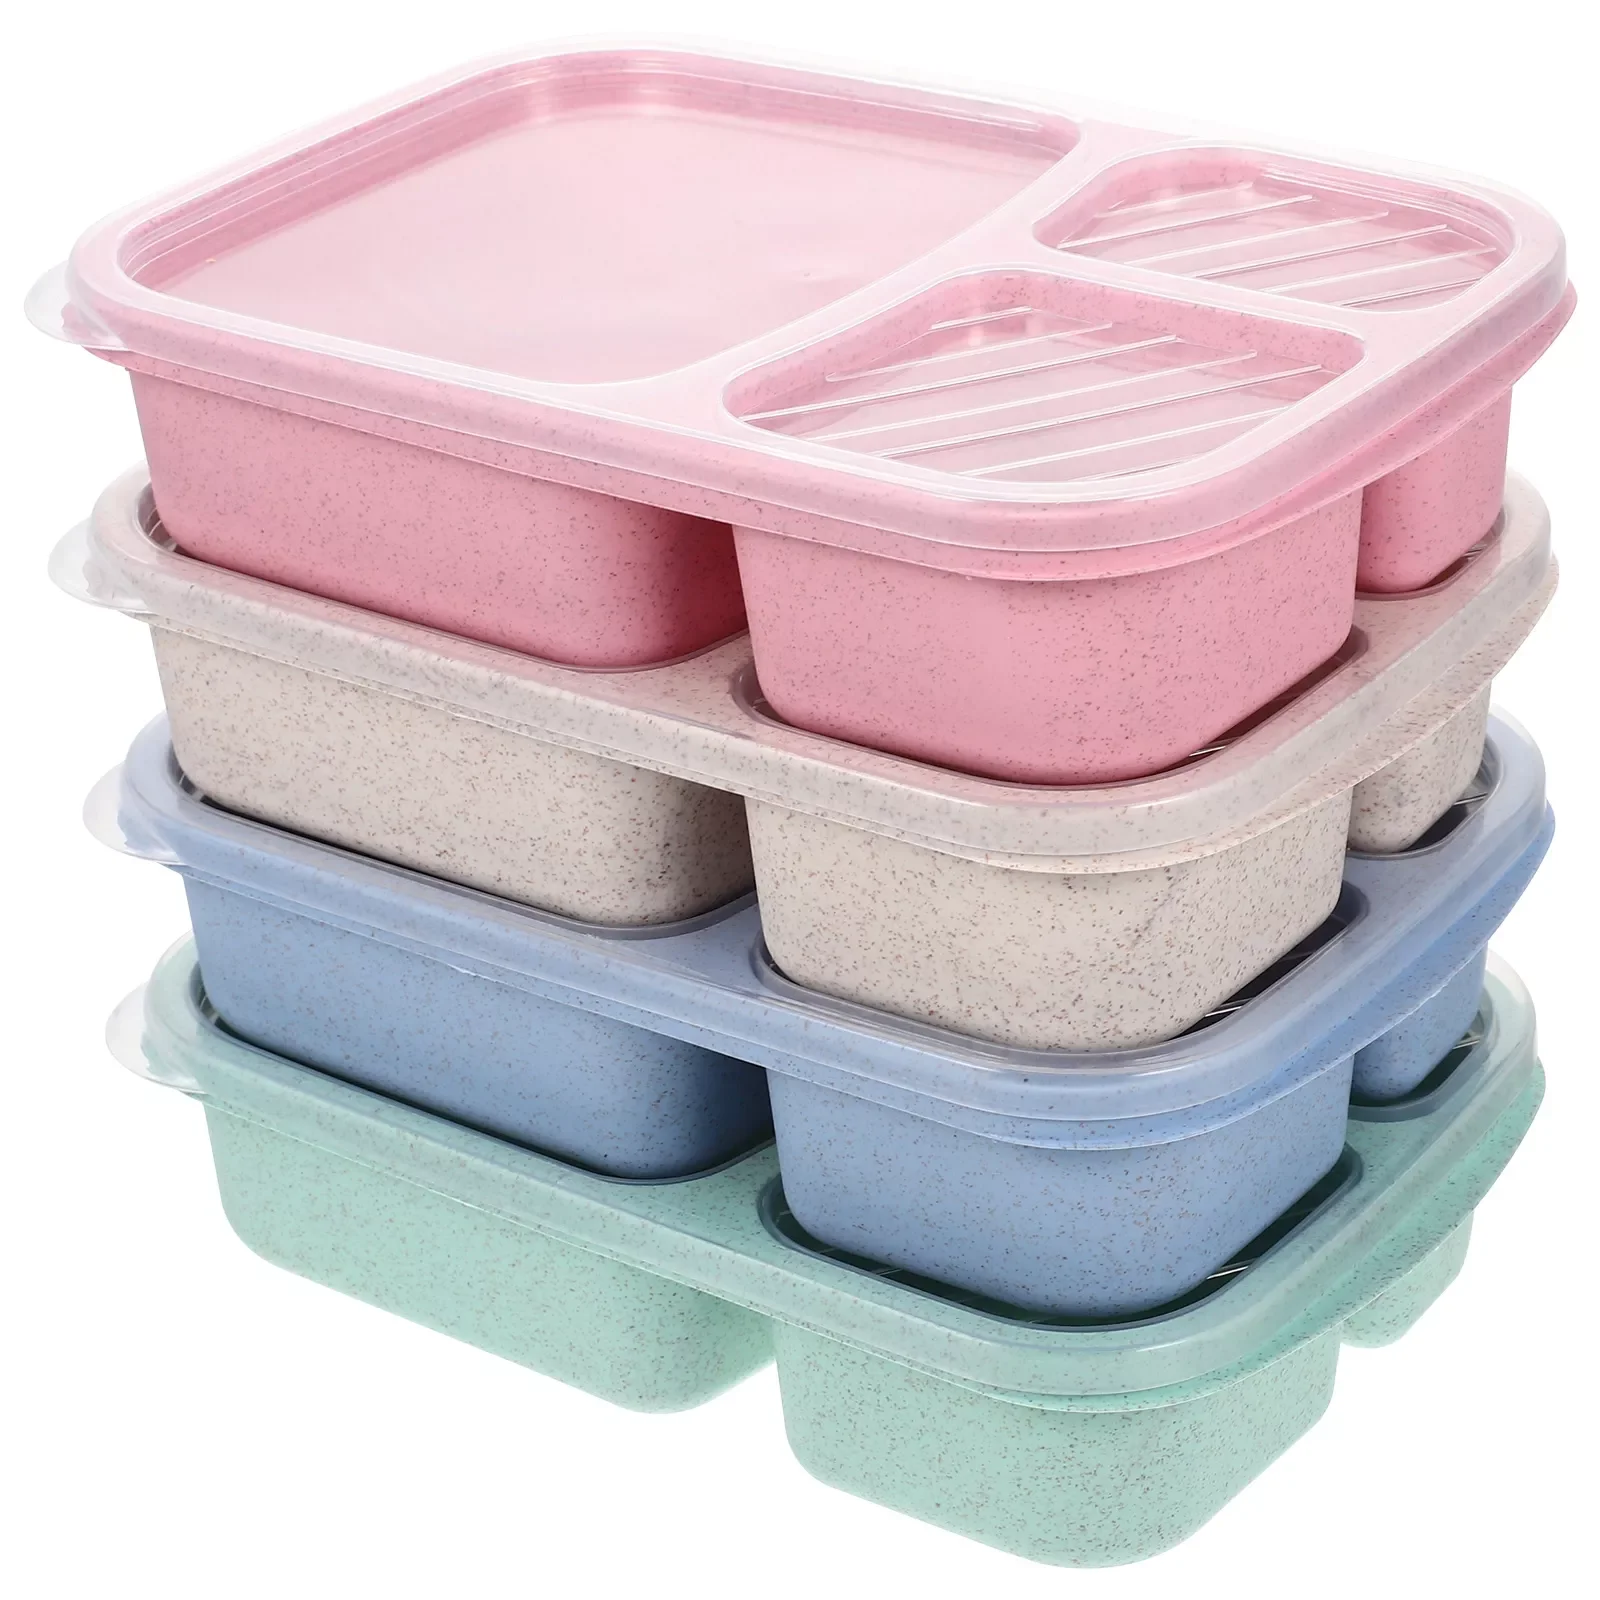 

Box Lunch Bento Containercontainers Kids Meal Boxes Portable Storage Prep School Stackable Divided Japanese Office Case Student